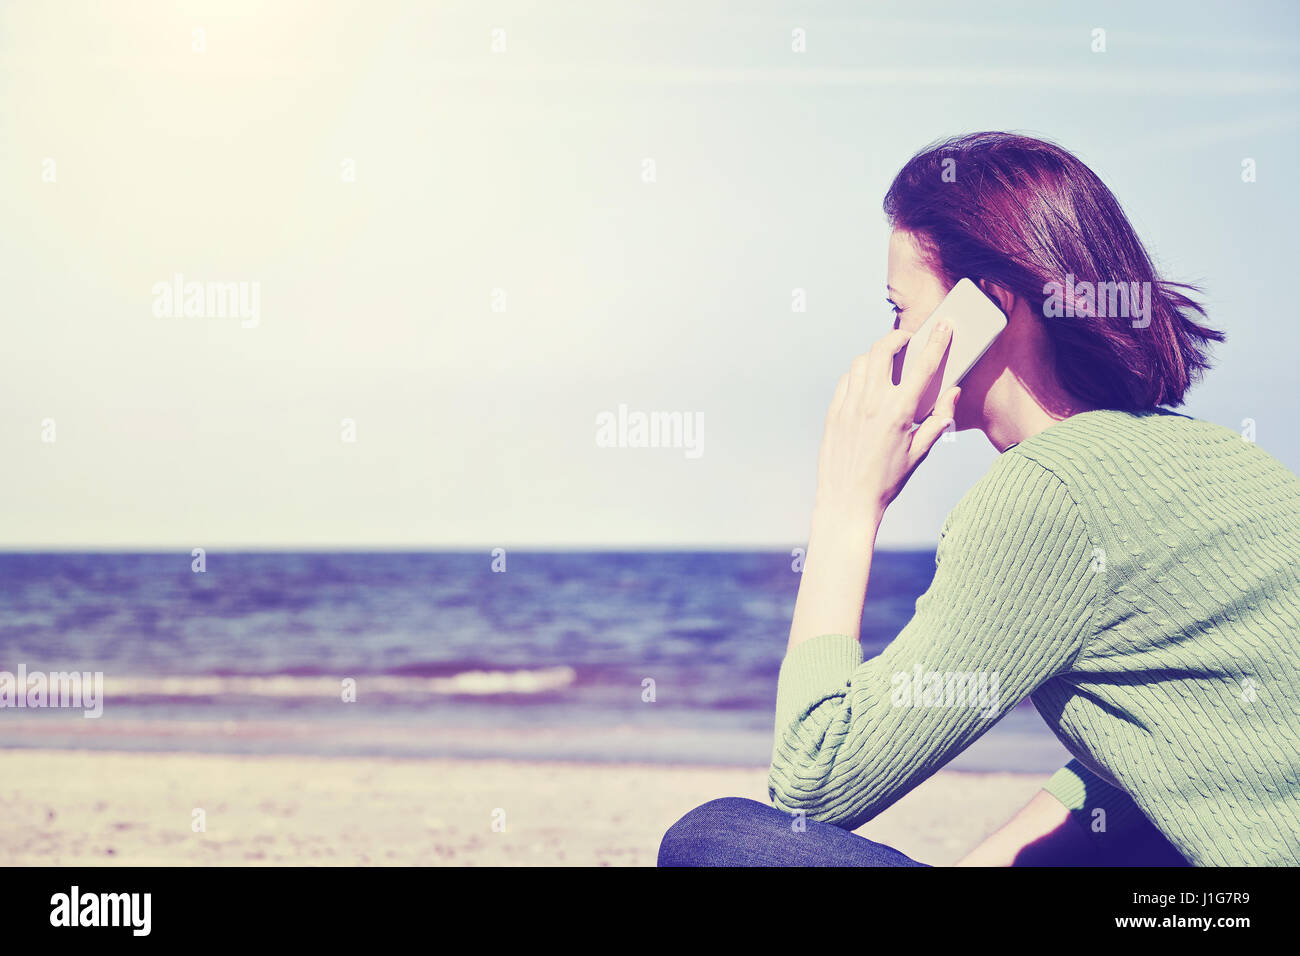 Vintage toned picture of a woman talking on a mobile phone on a beach, side view with copy space. Stock Photo